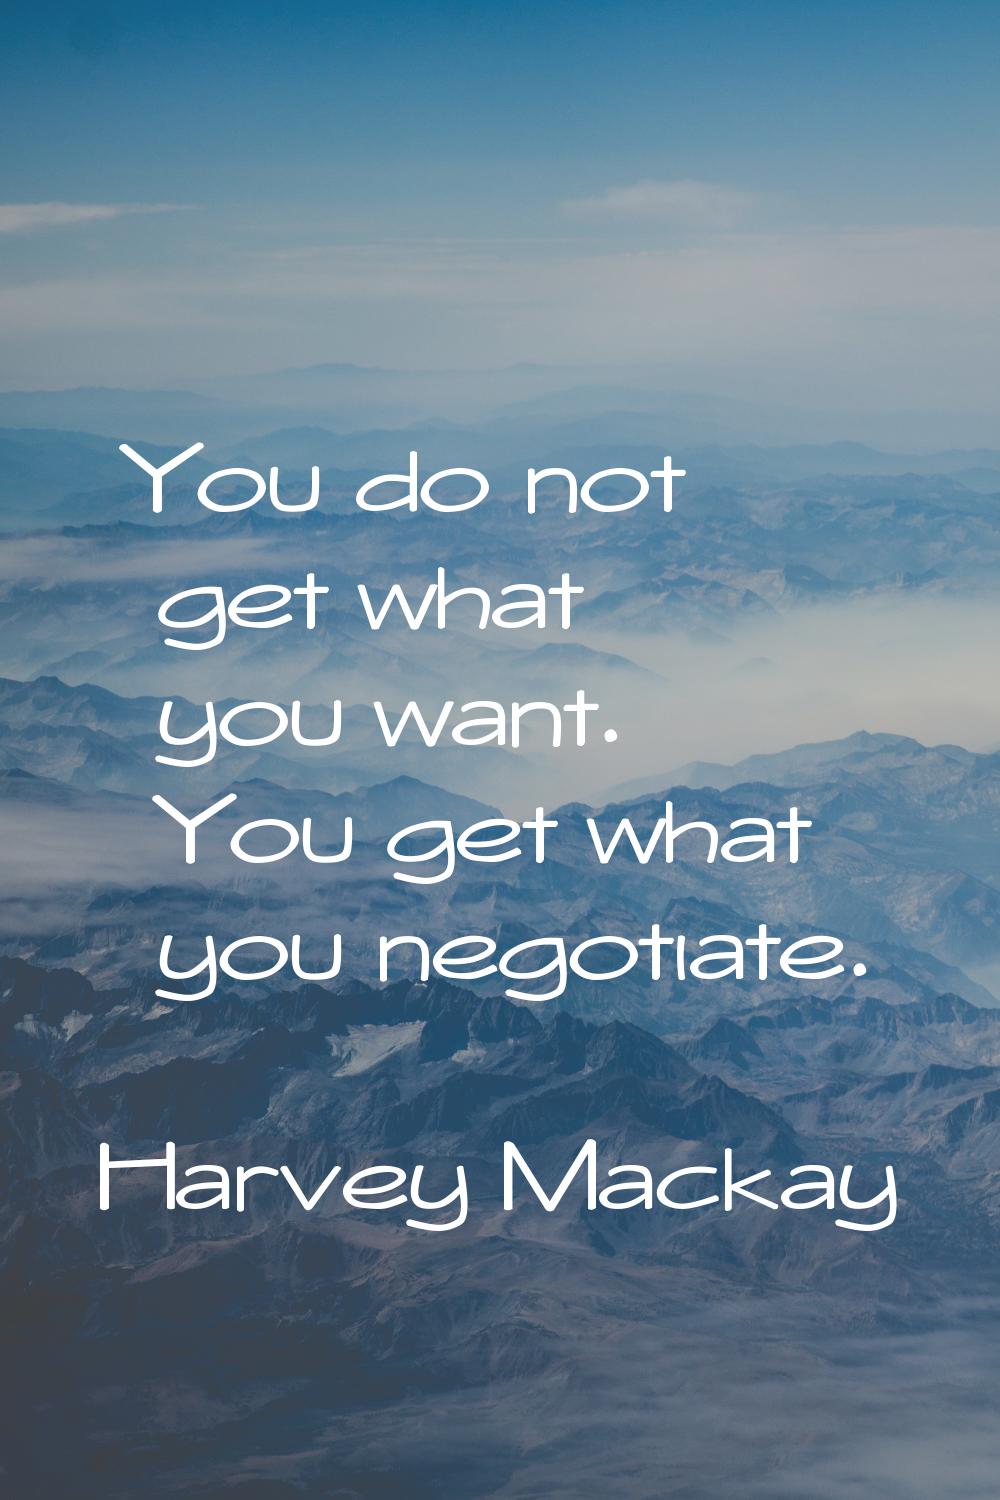 You do not get what you want. You get what you negotiate.